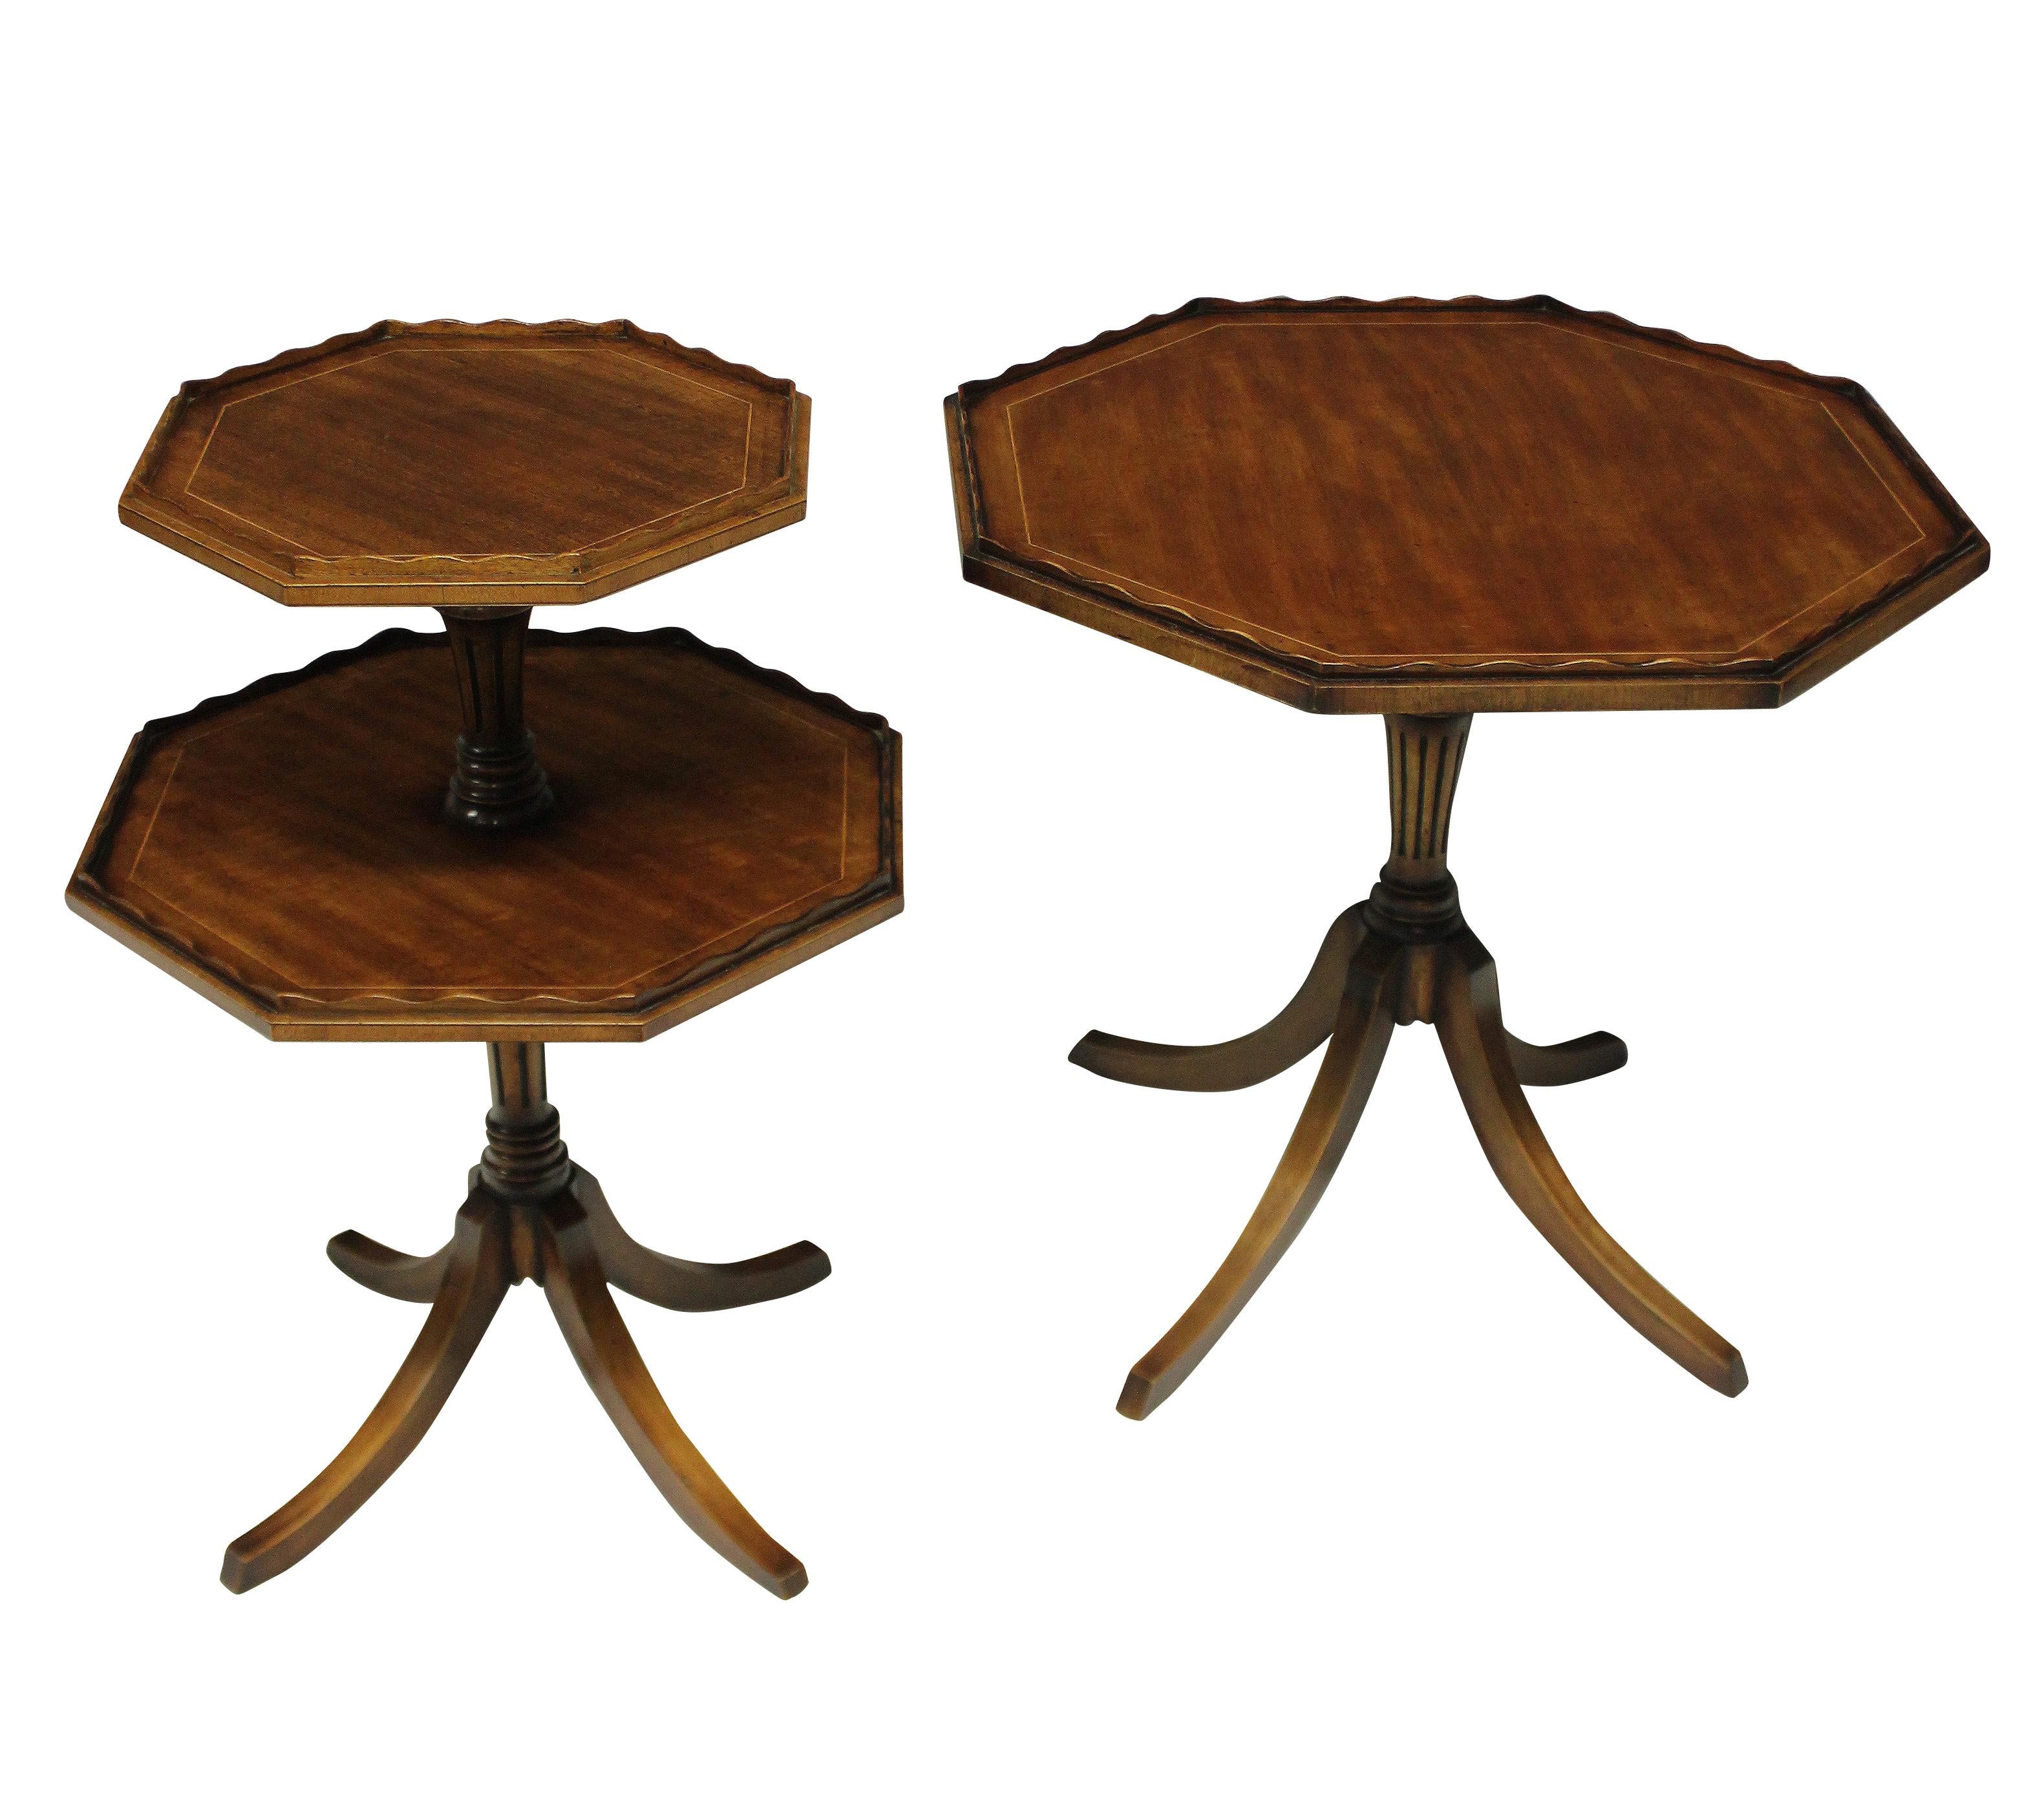 A pair of English mahogany side tables with good patina, each with an octagonal top with pie crust edge. One table with a tilt-top and the other with two tiers, both with box wood stringing.
Measures: 56cm high x 60 diameter (tilt-top) x 68cm high